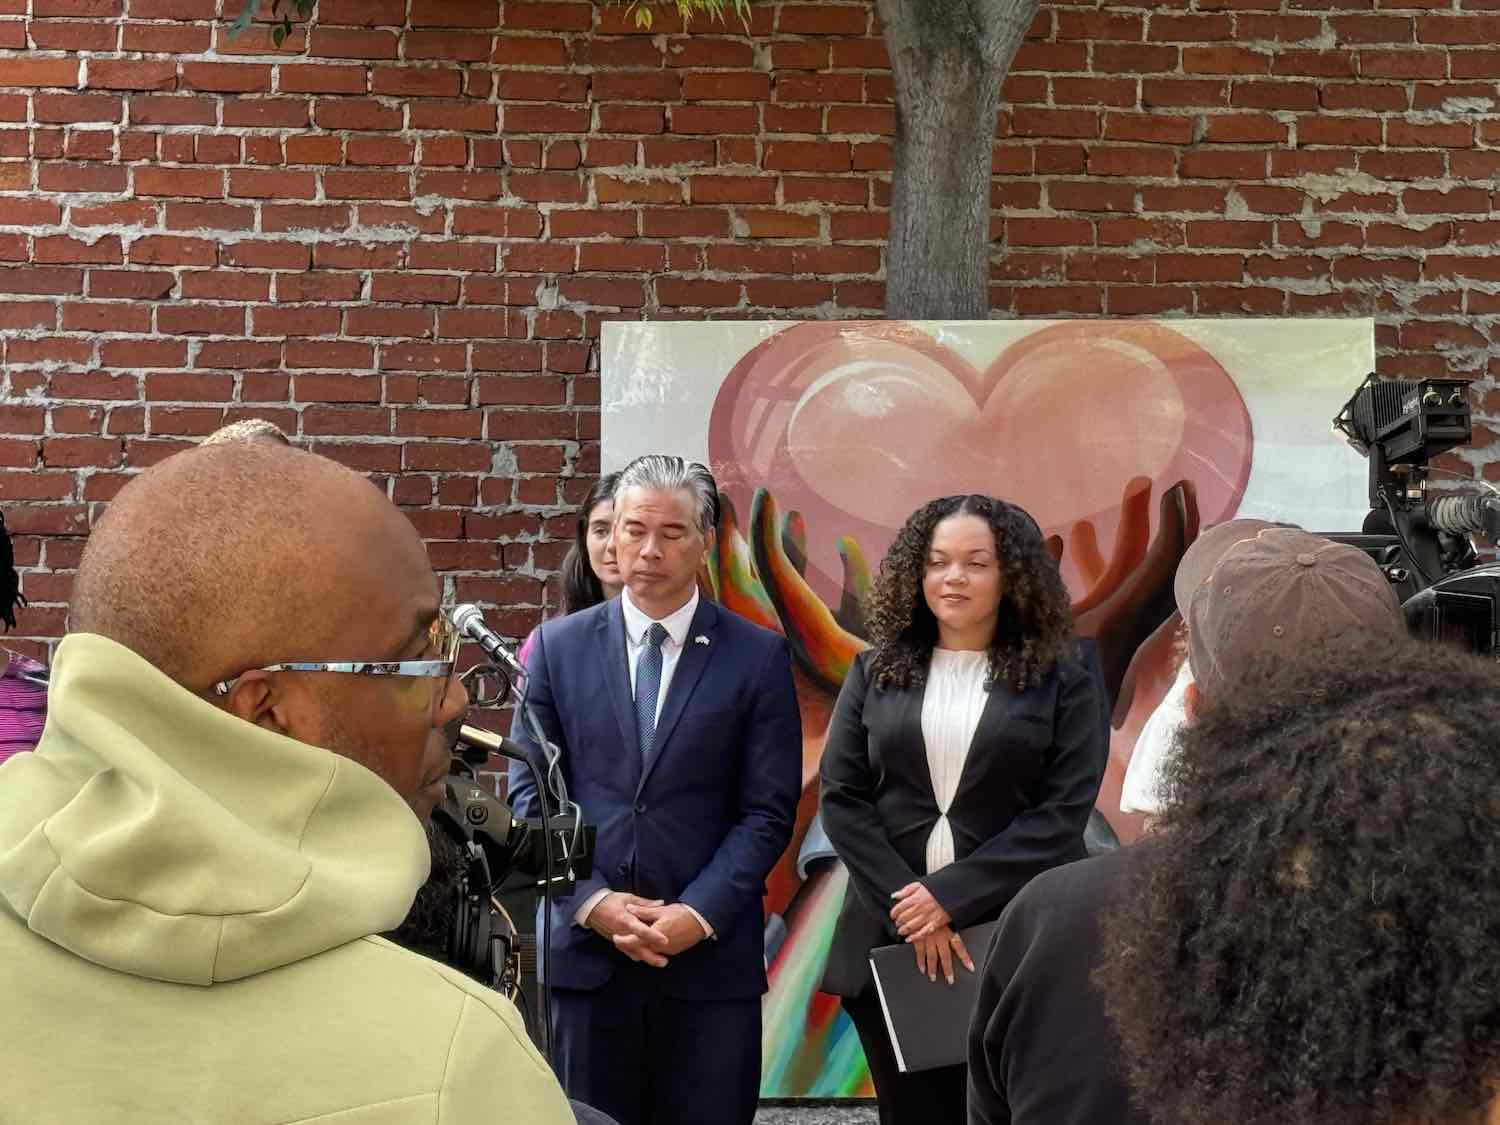 Black Women for Wellness & California Attorney General Press Conference 2023 7